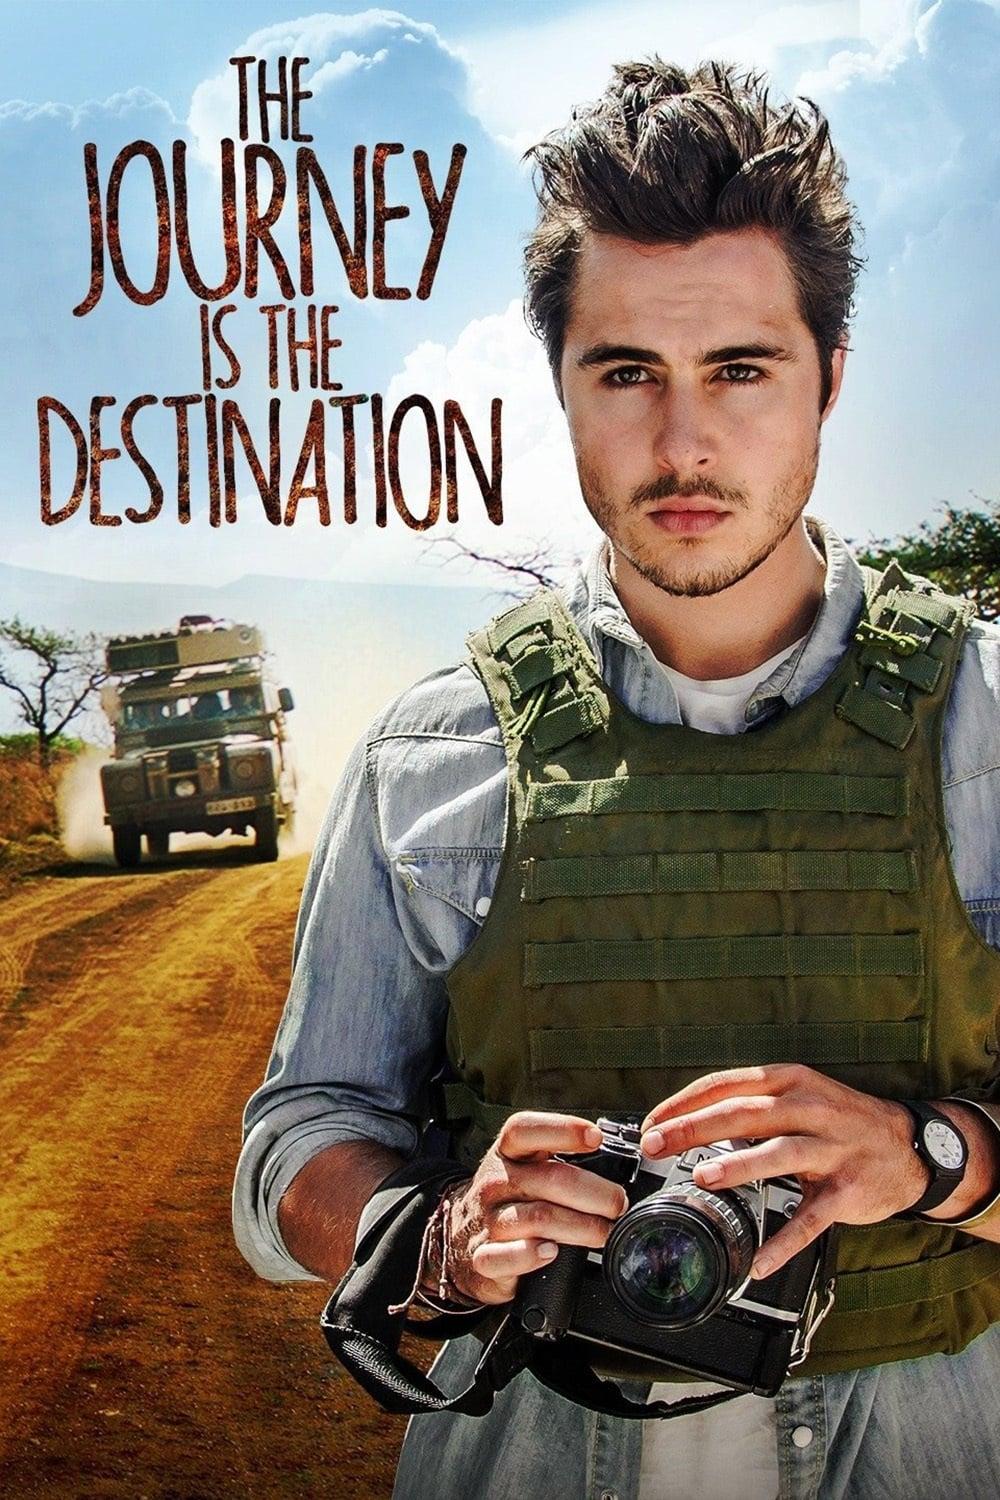 The Journey Is the Destination poster